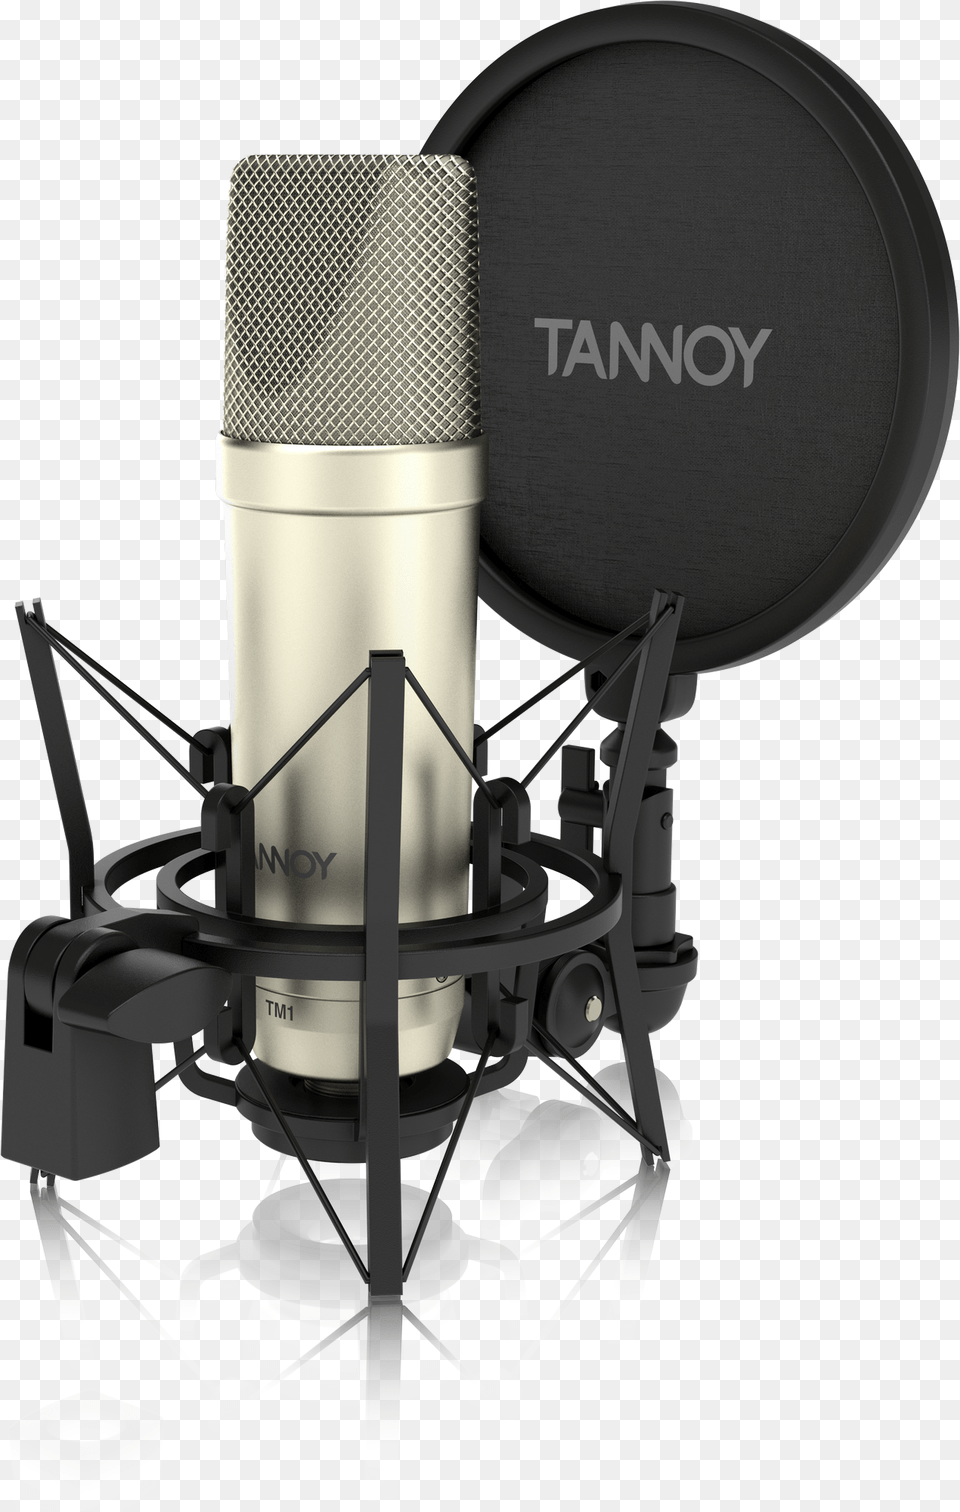 Large Tannoy Tm1 Recording Package With Condenser Microphone, Electrical Device Png Image